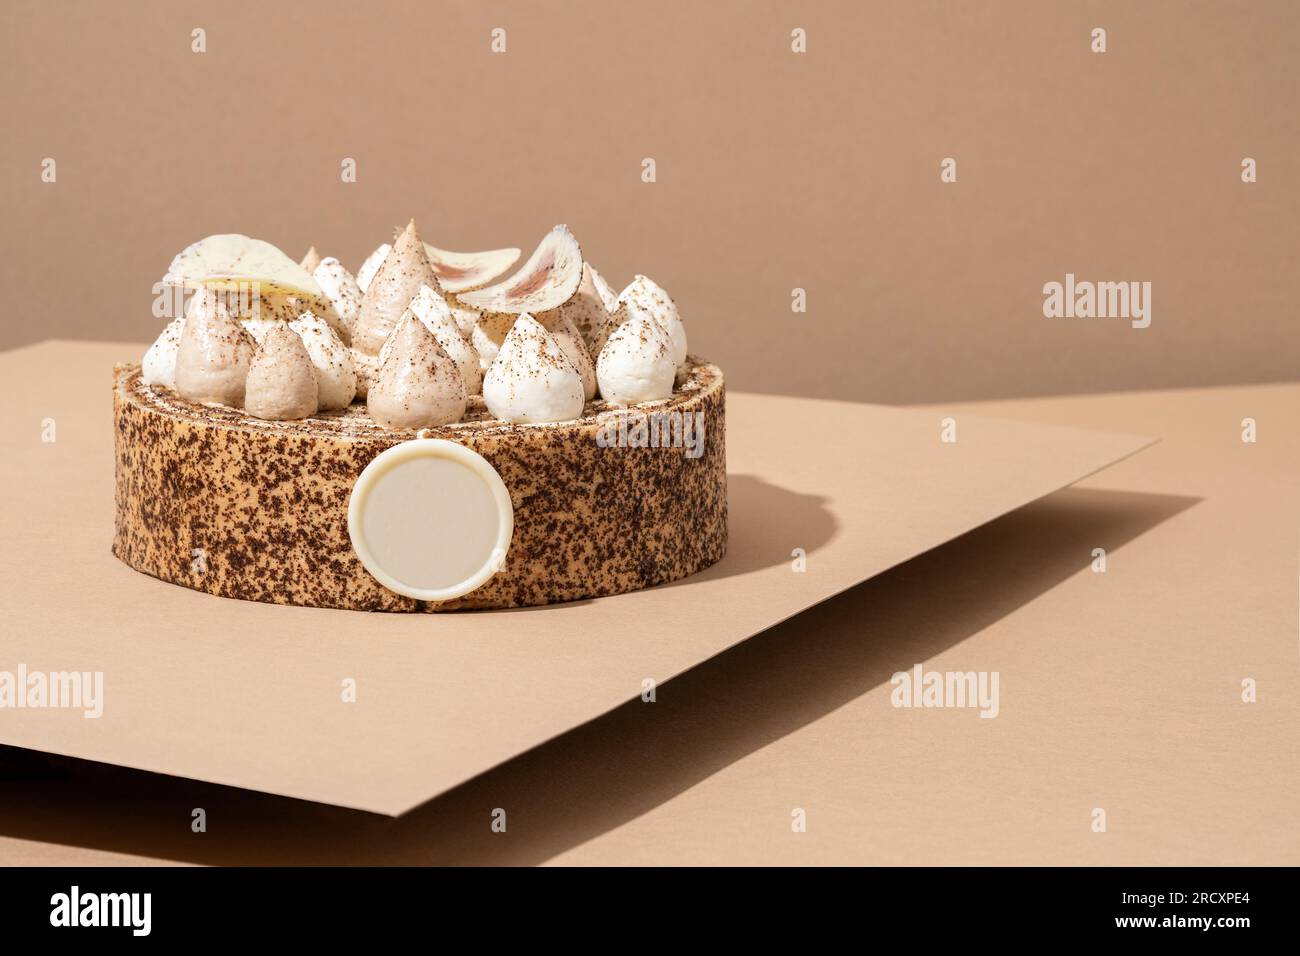 A scrumptious desert plate featuring a meringue desert, served on a cardboard plate and topped with cream Stock Photo